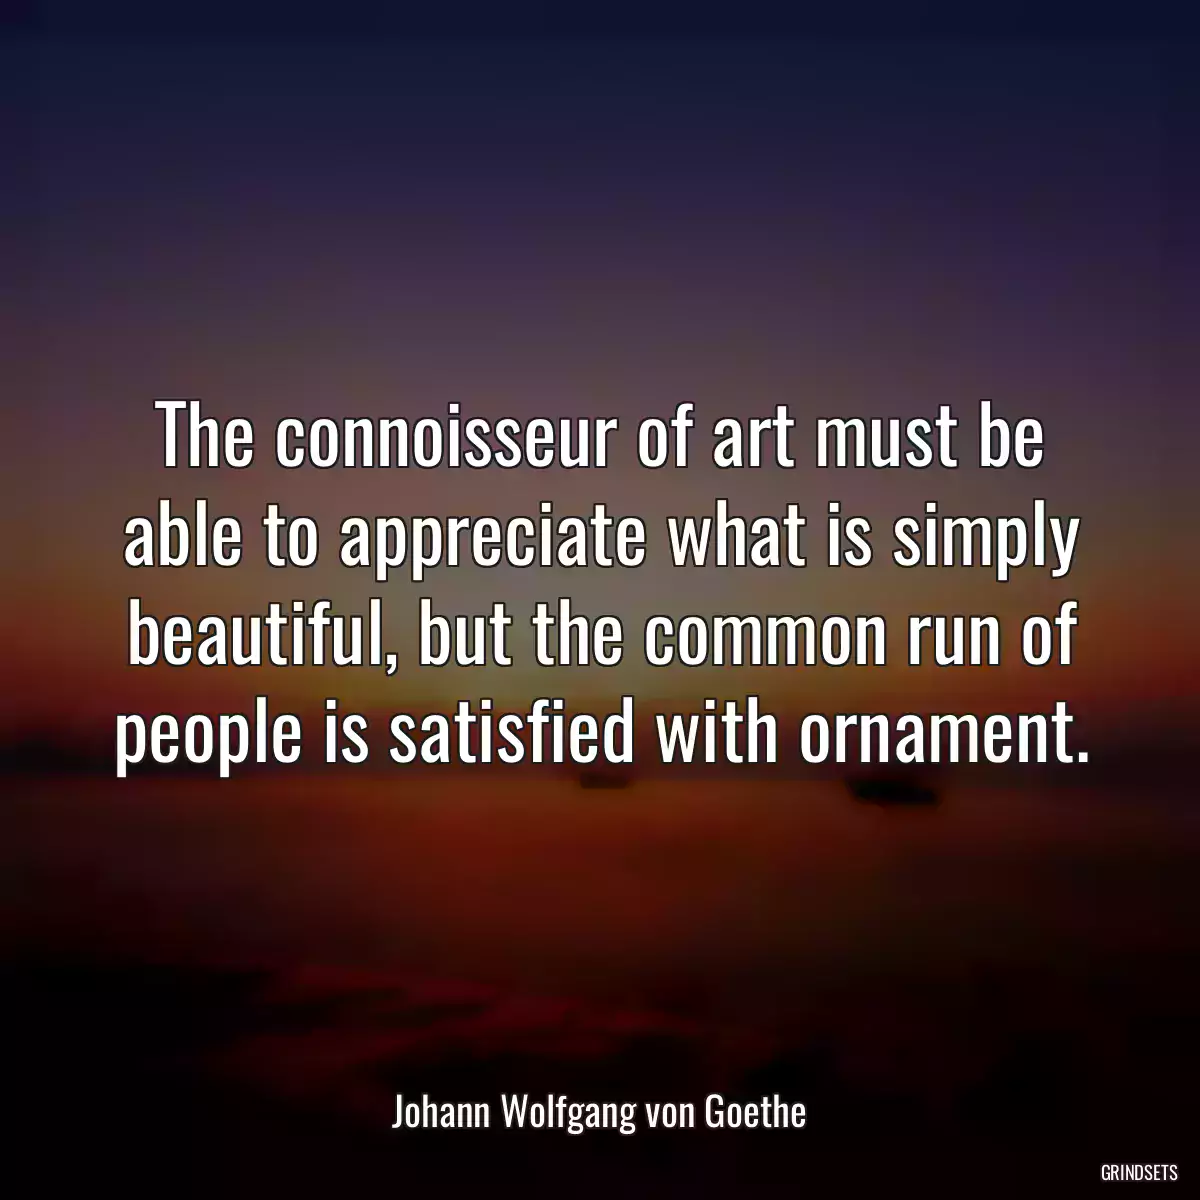 The connoisseur of art must be able to appreciate what is simply beautiful, but the common run of people is satisfied with ornament.